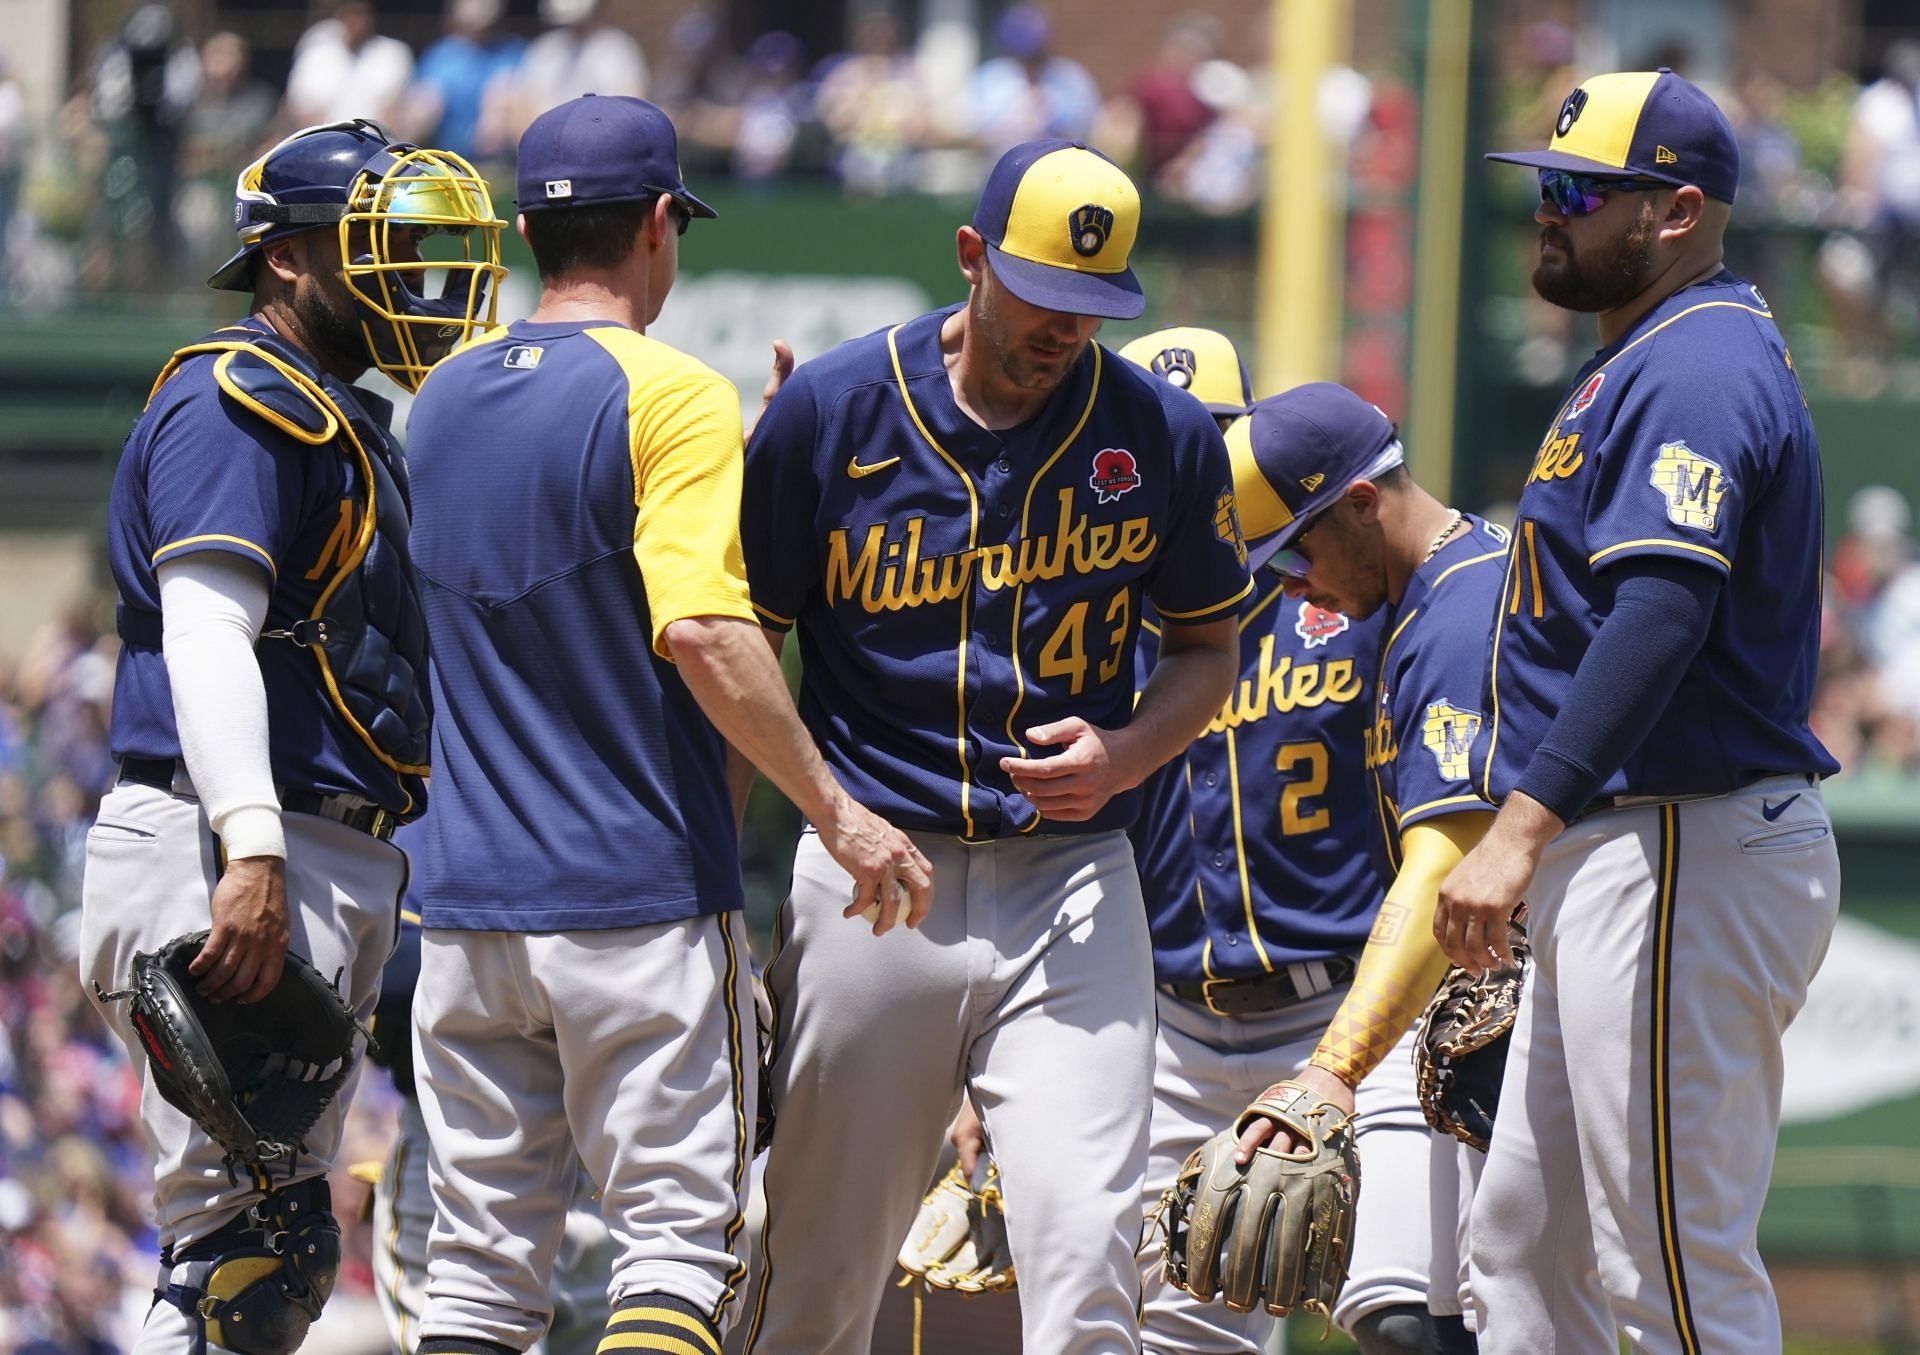 Manager Craig Counsell of the Milwaukee Brewers removes Ethan Small during the third inning.